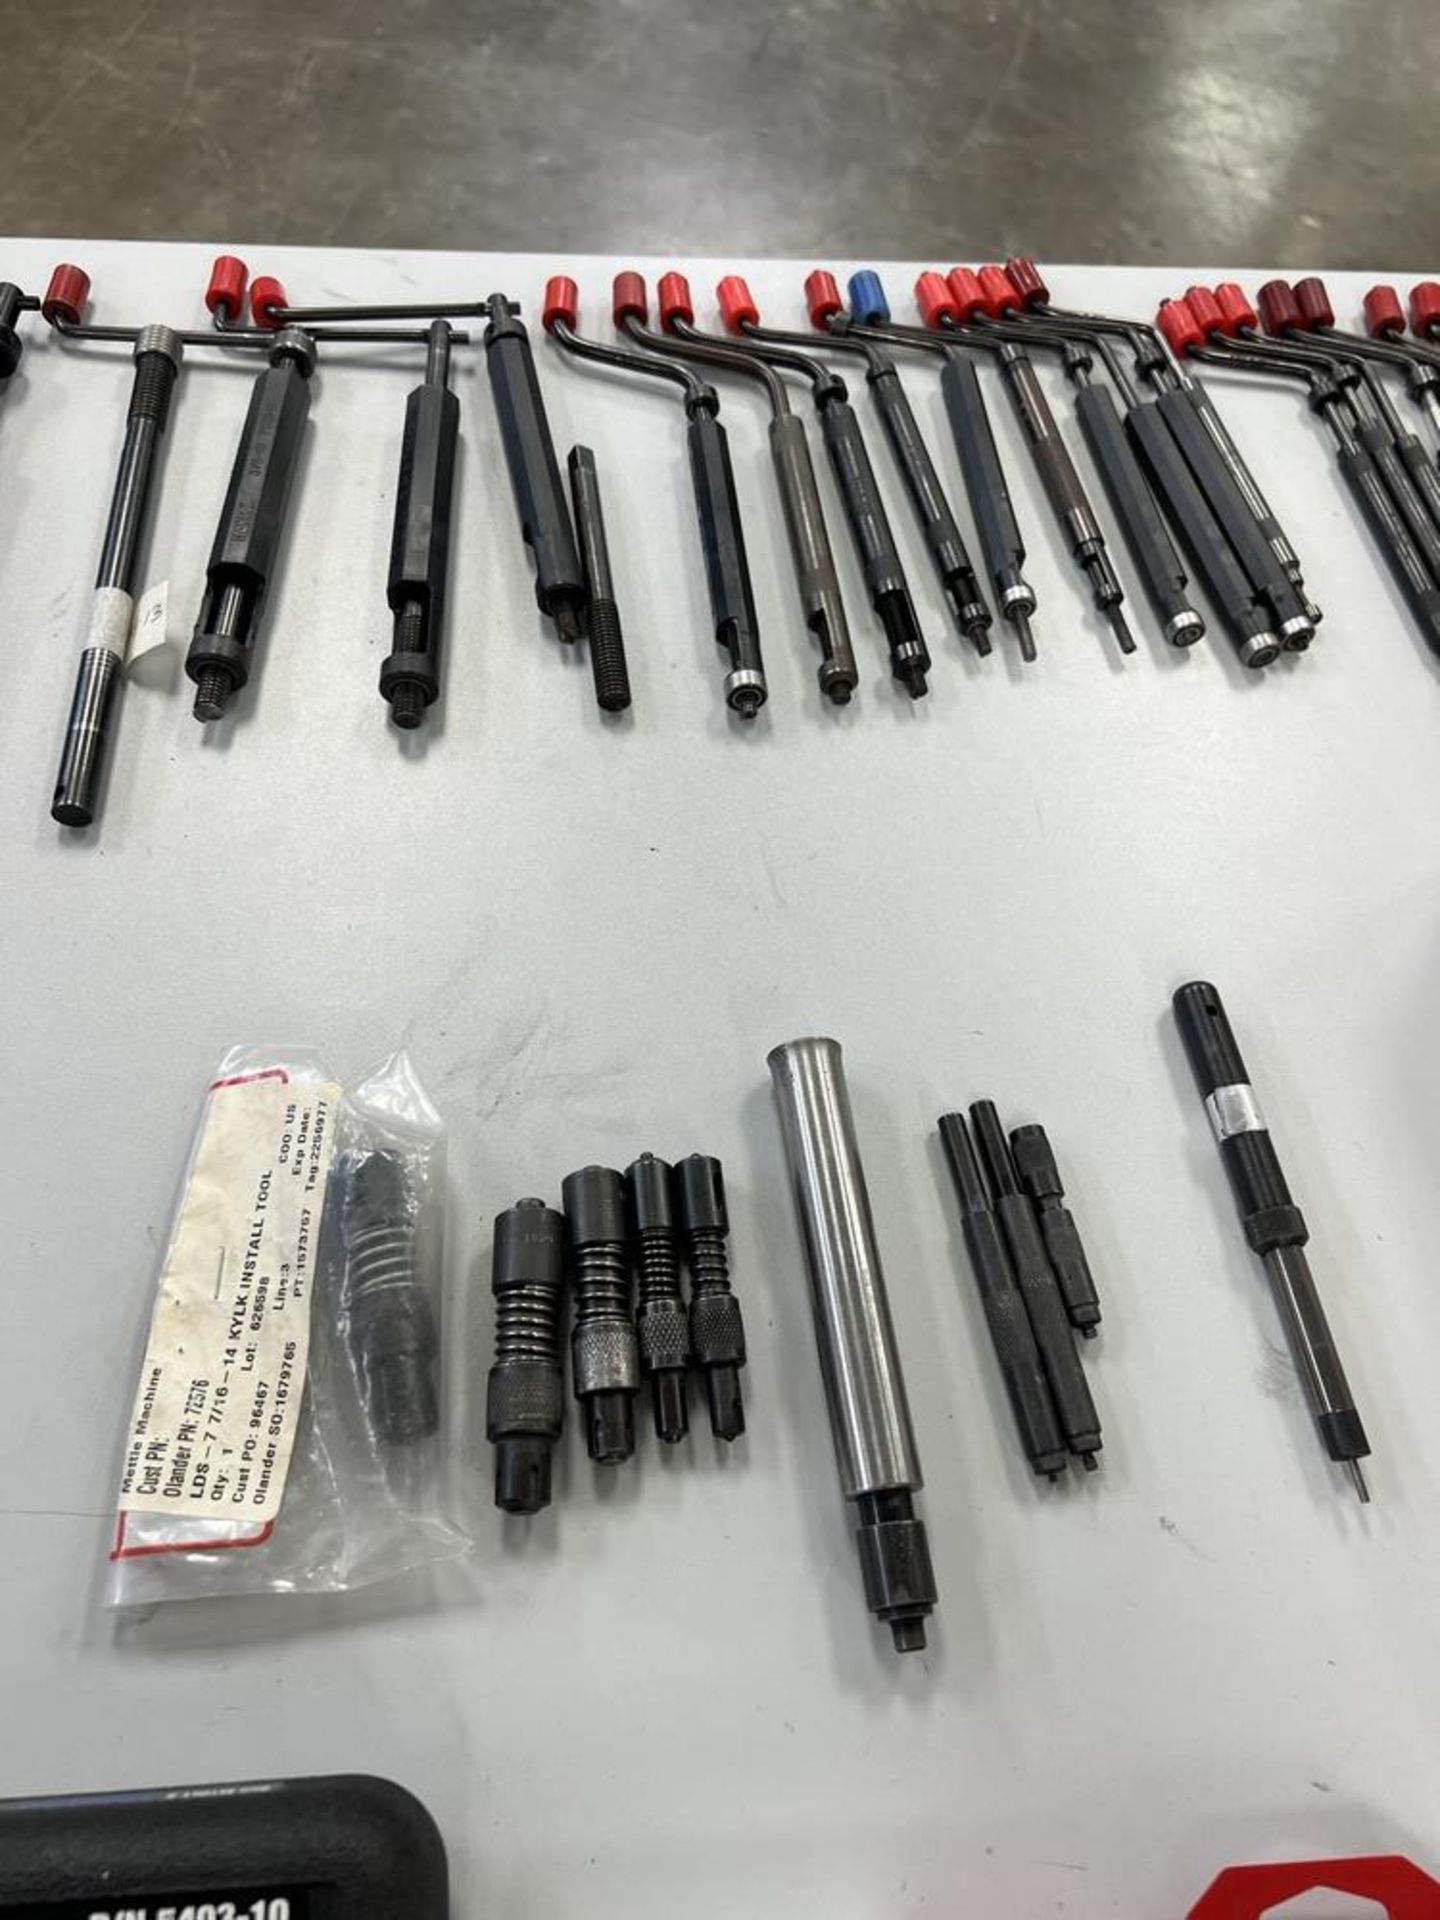 Large Lot of Helicoil Instalation Tools, Helicoils, Thread Repair Kits Helicoil Tangless Tools, - Image 9 of 15